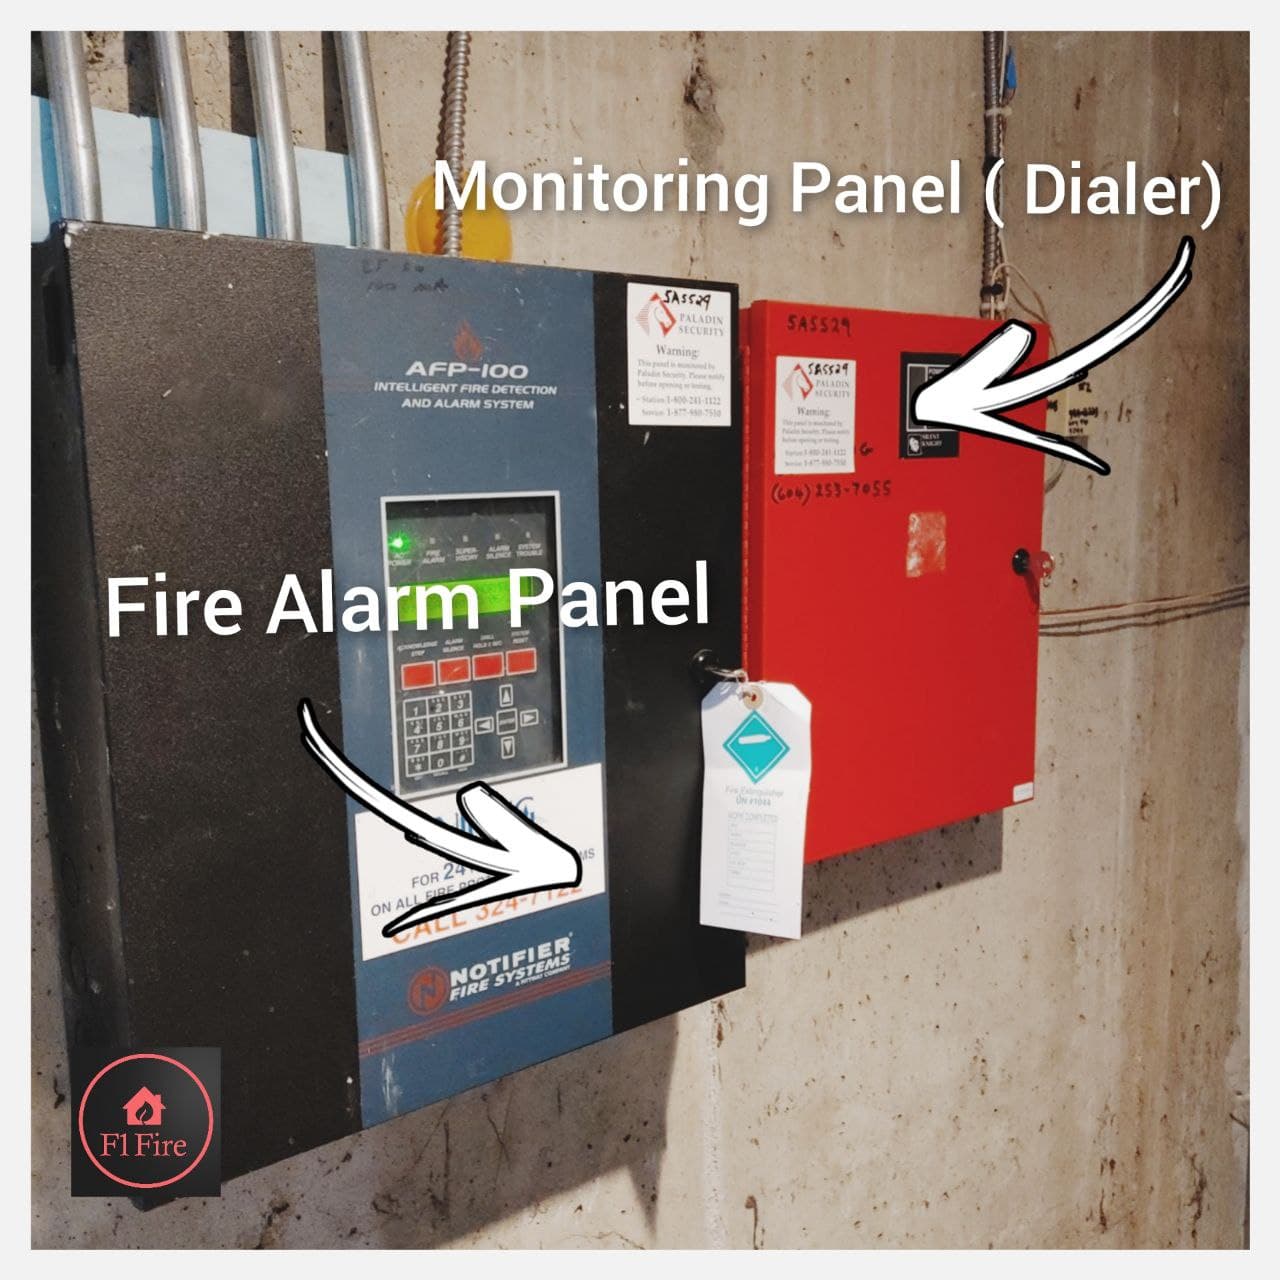 Fire Alarm and Fire Monitoring Panel